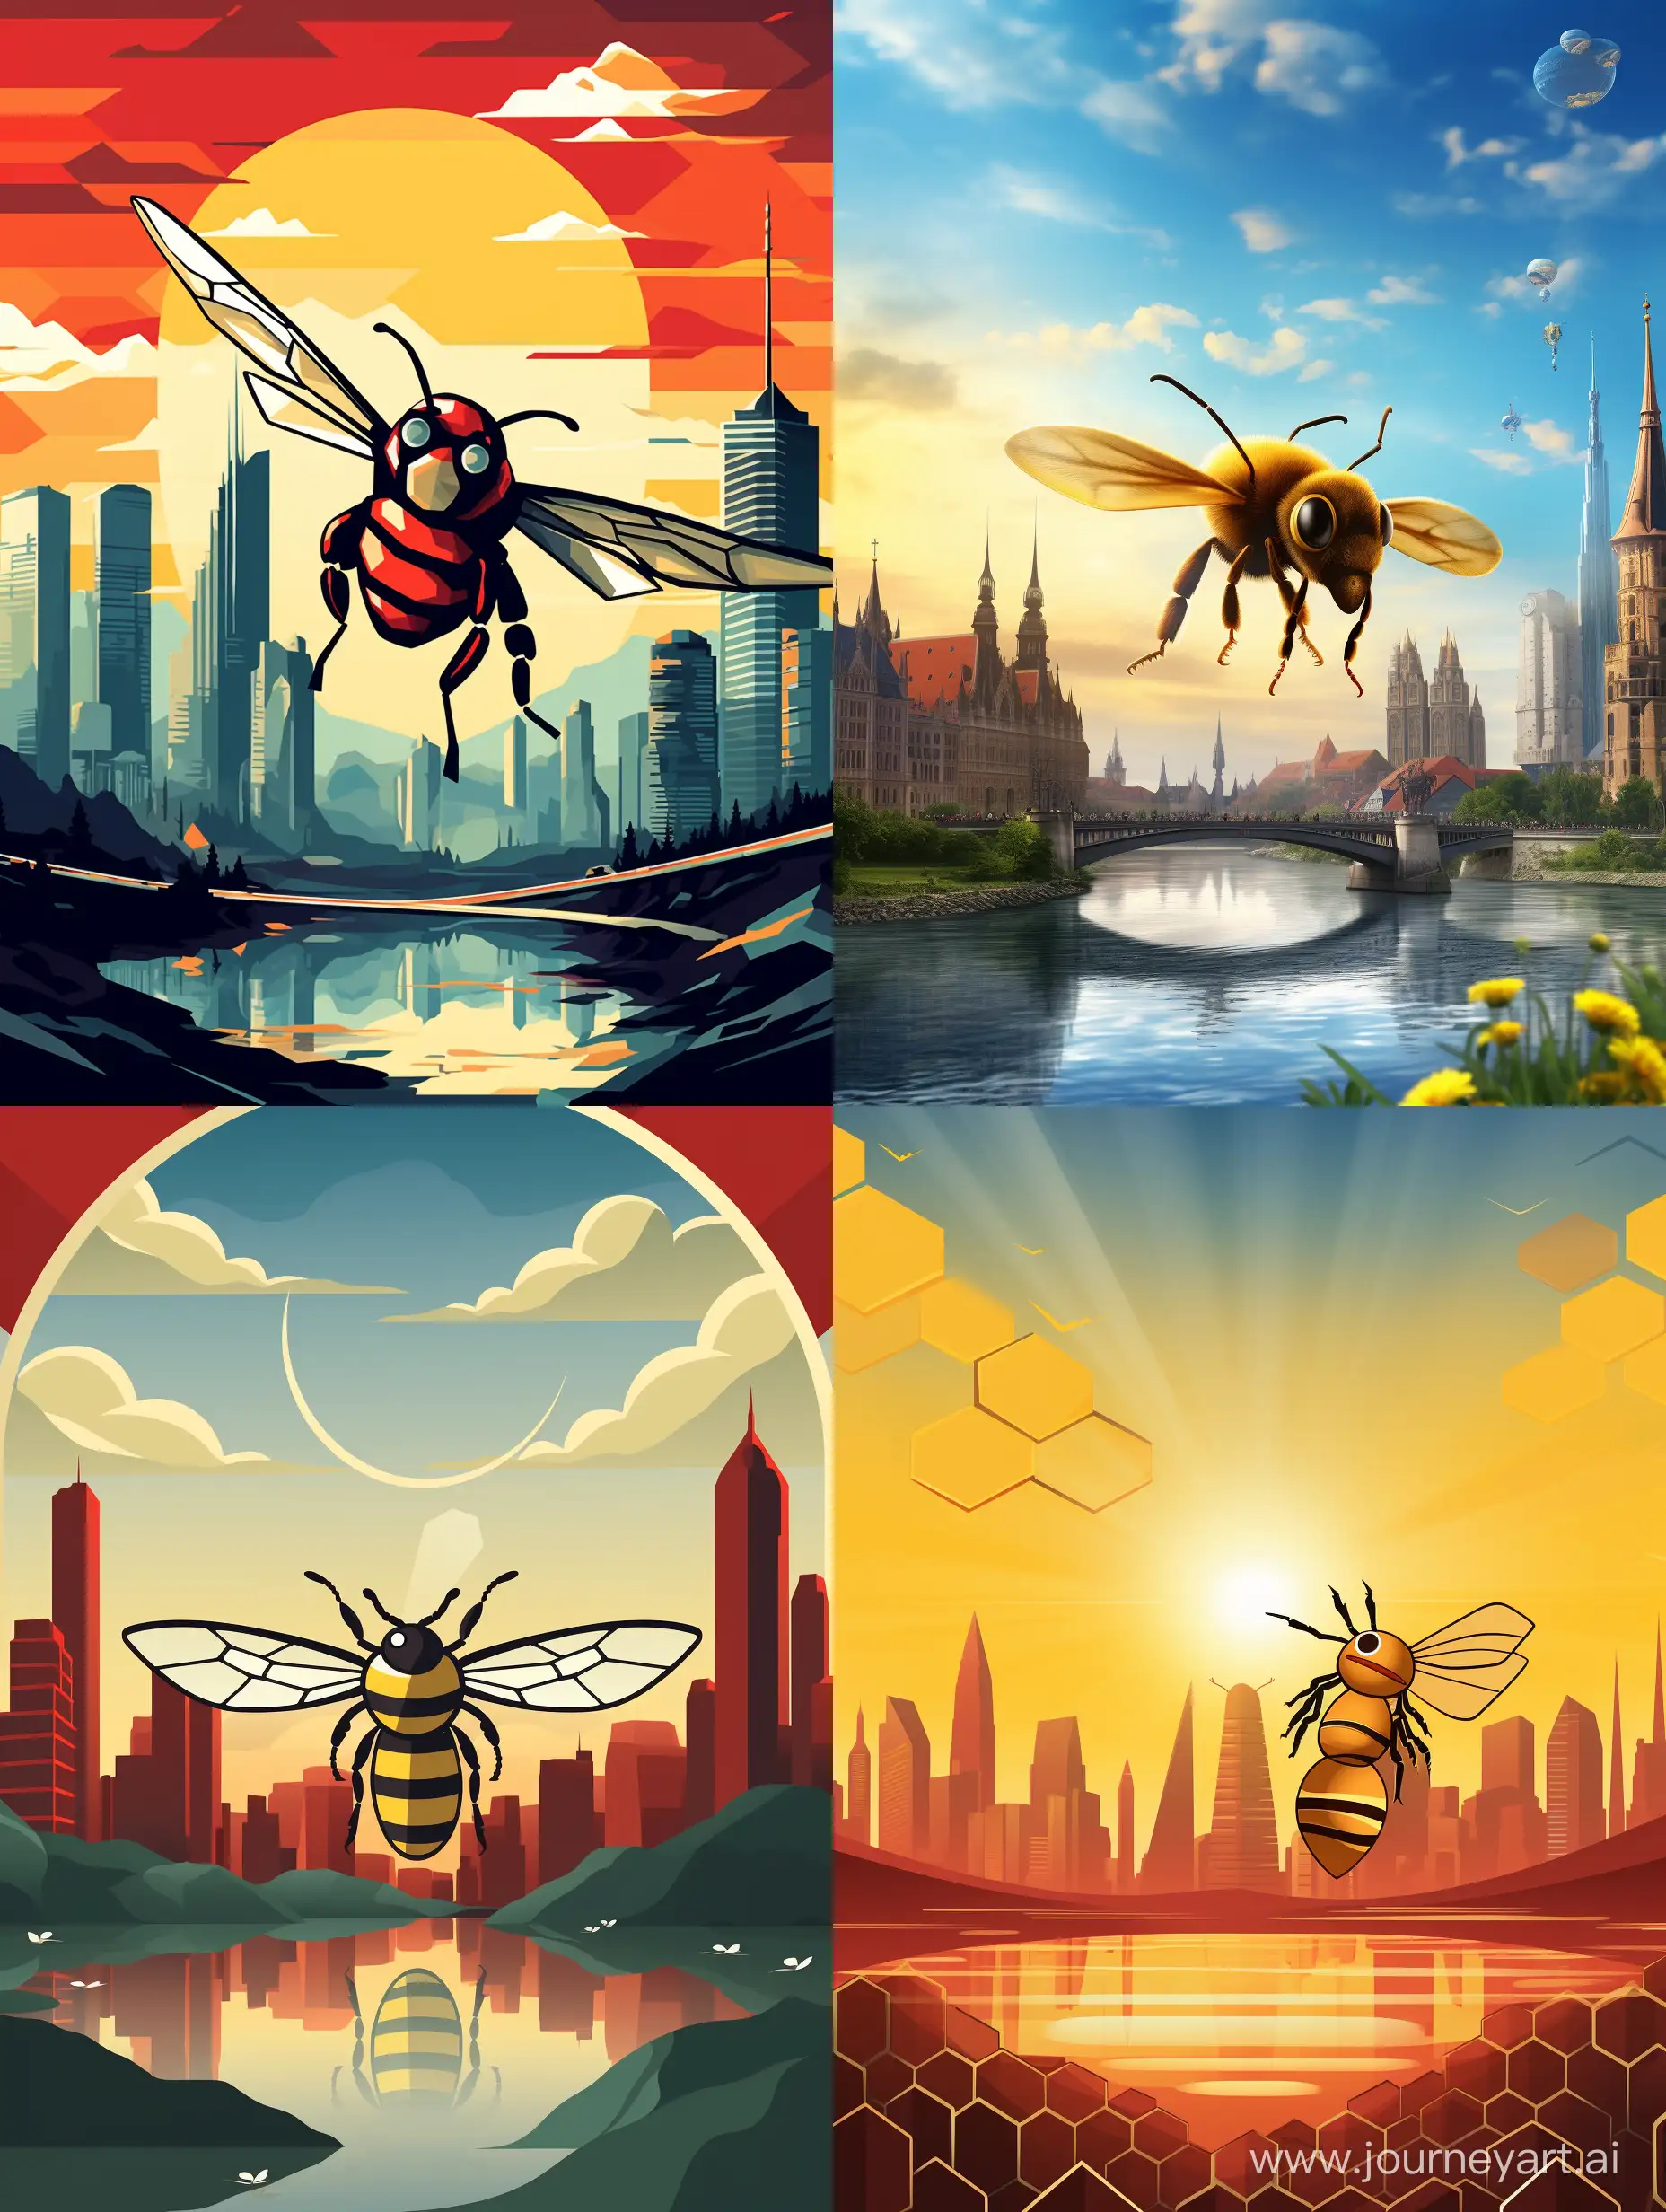 can you provide me a cool image which may fit the event like a ebpf bee logo on a Austrian flag and the city skyline at the bottom?